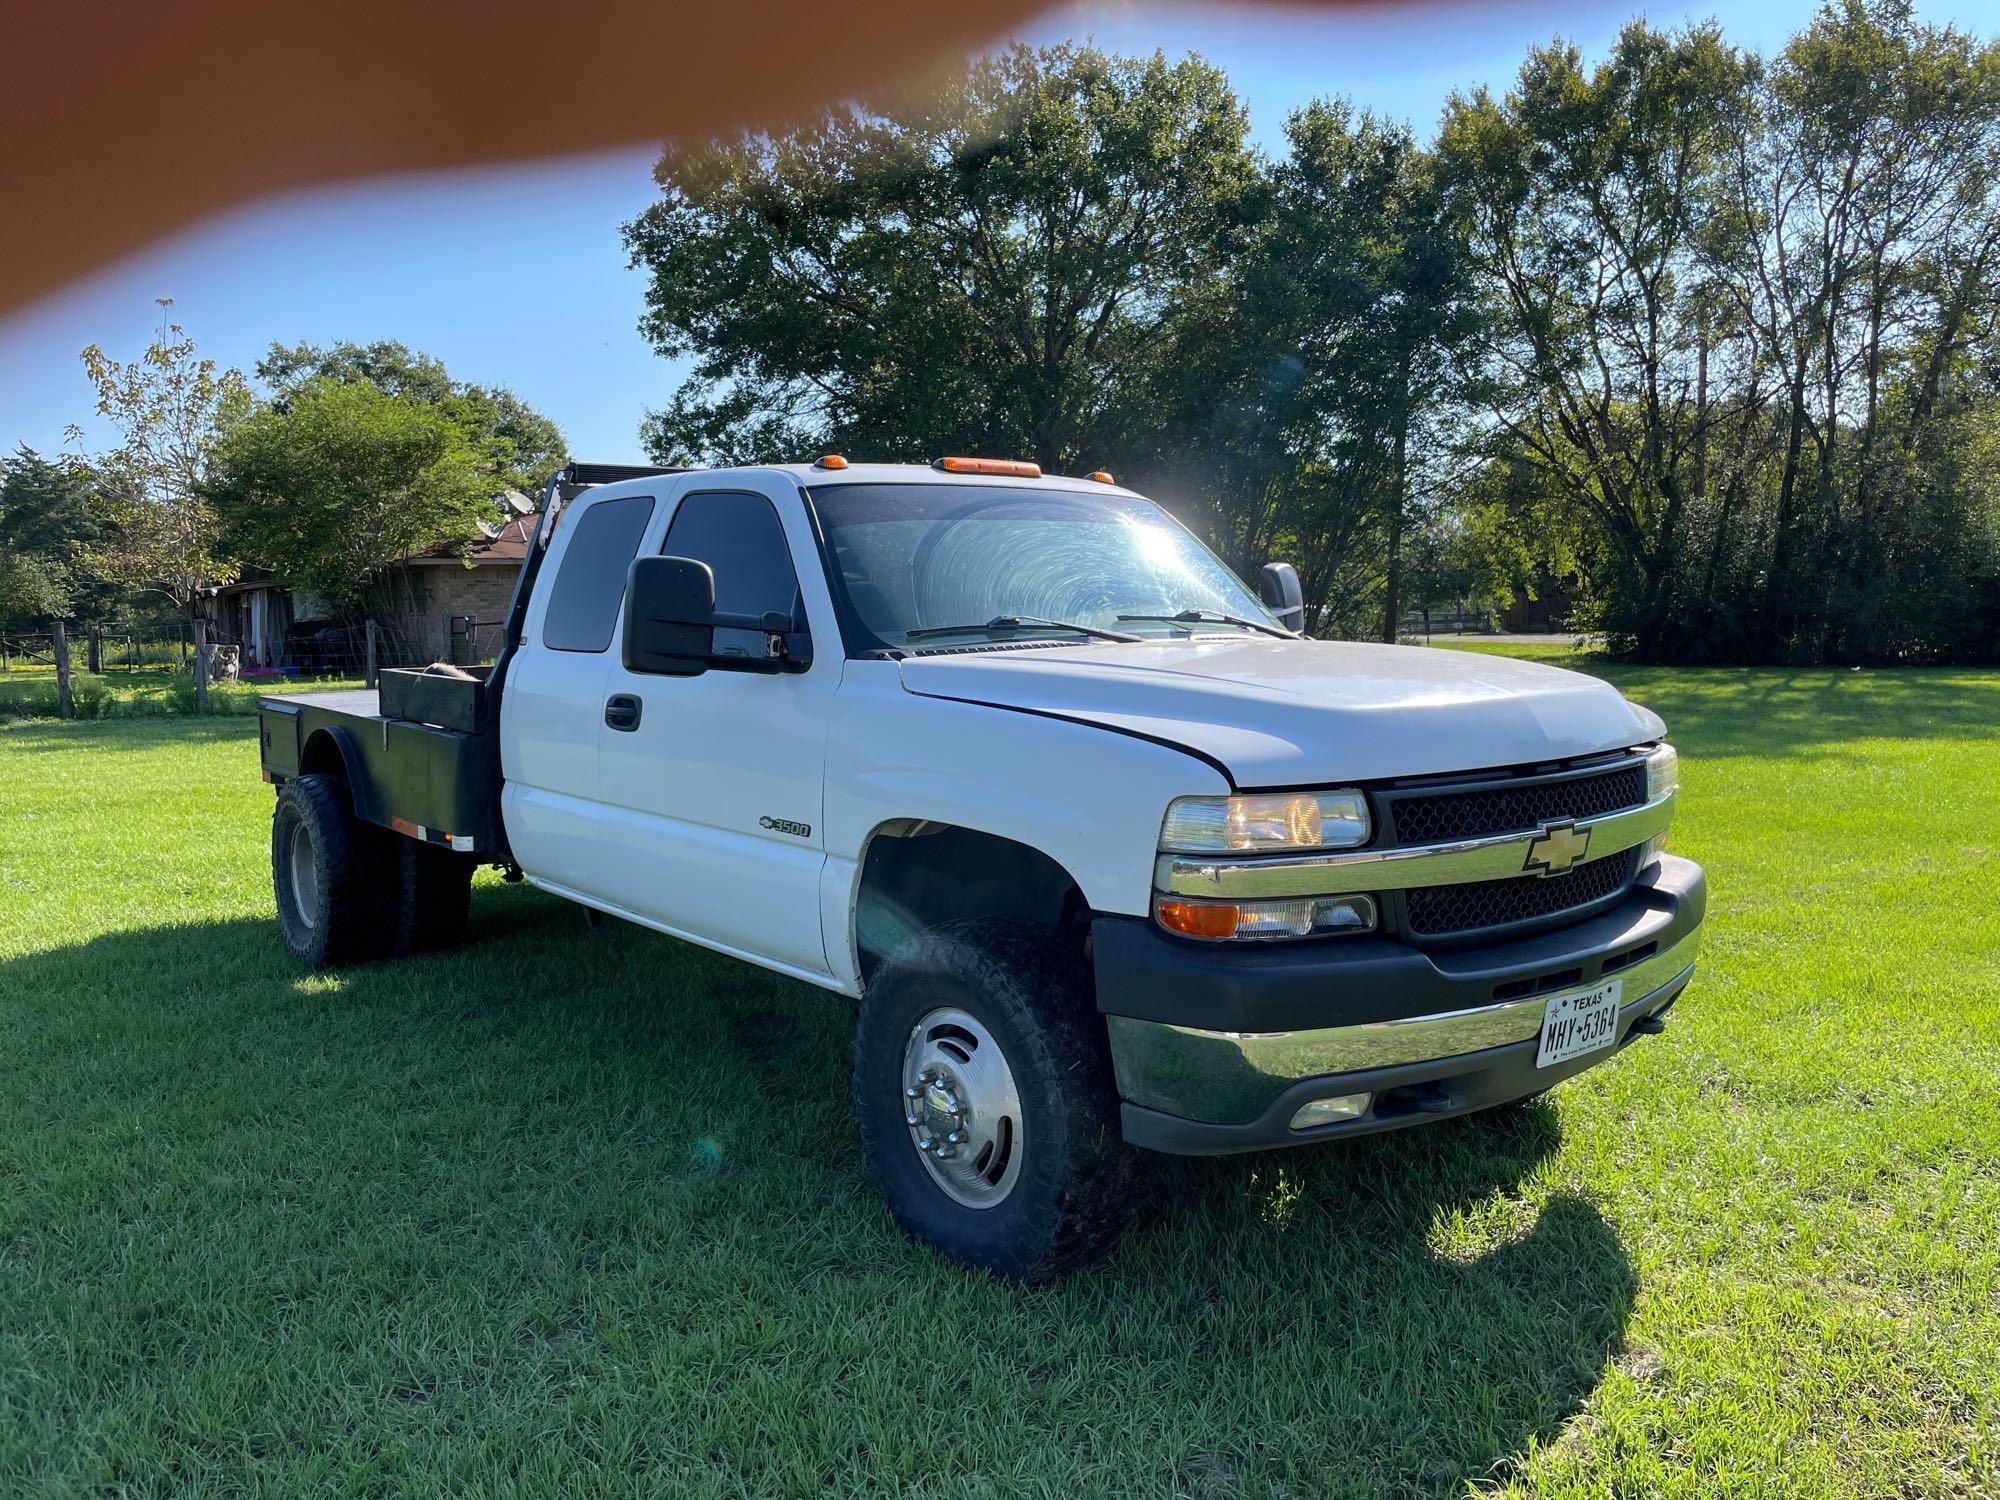 2001 Chevrolet Silverado 3500 Extended Cab Dually Flatbed Truck